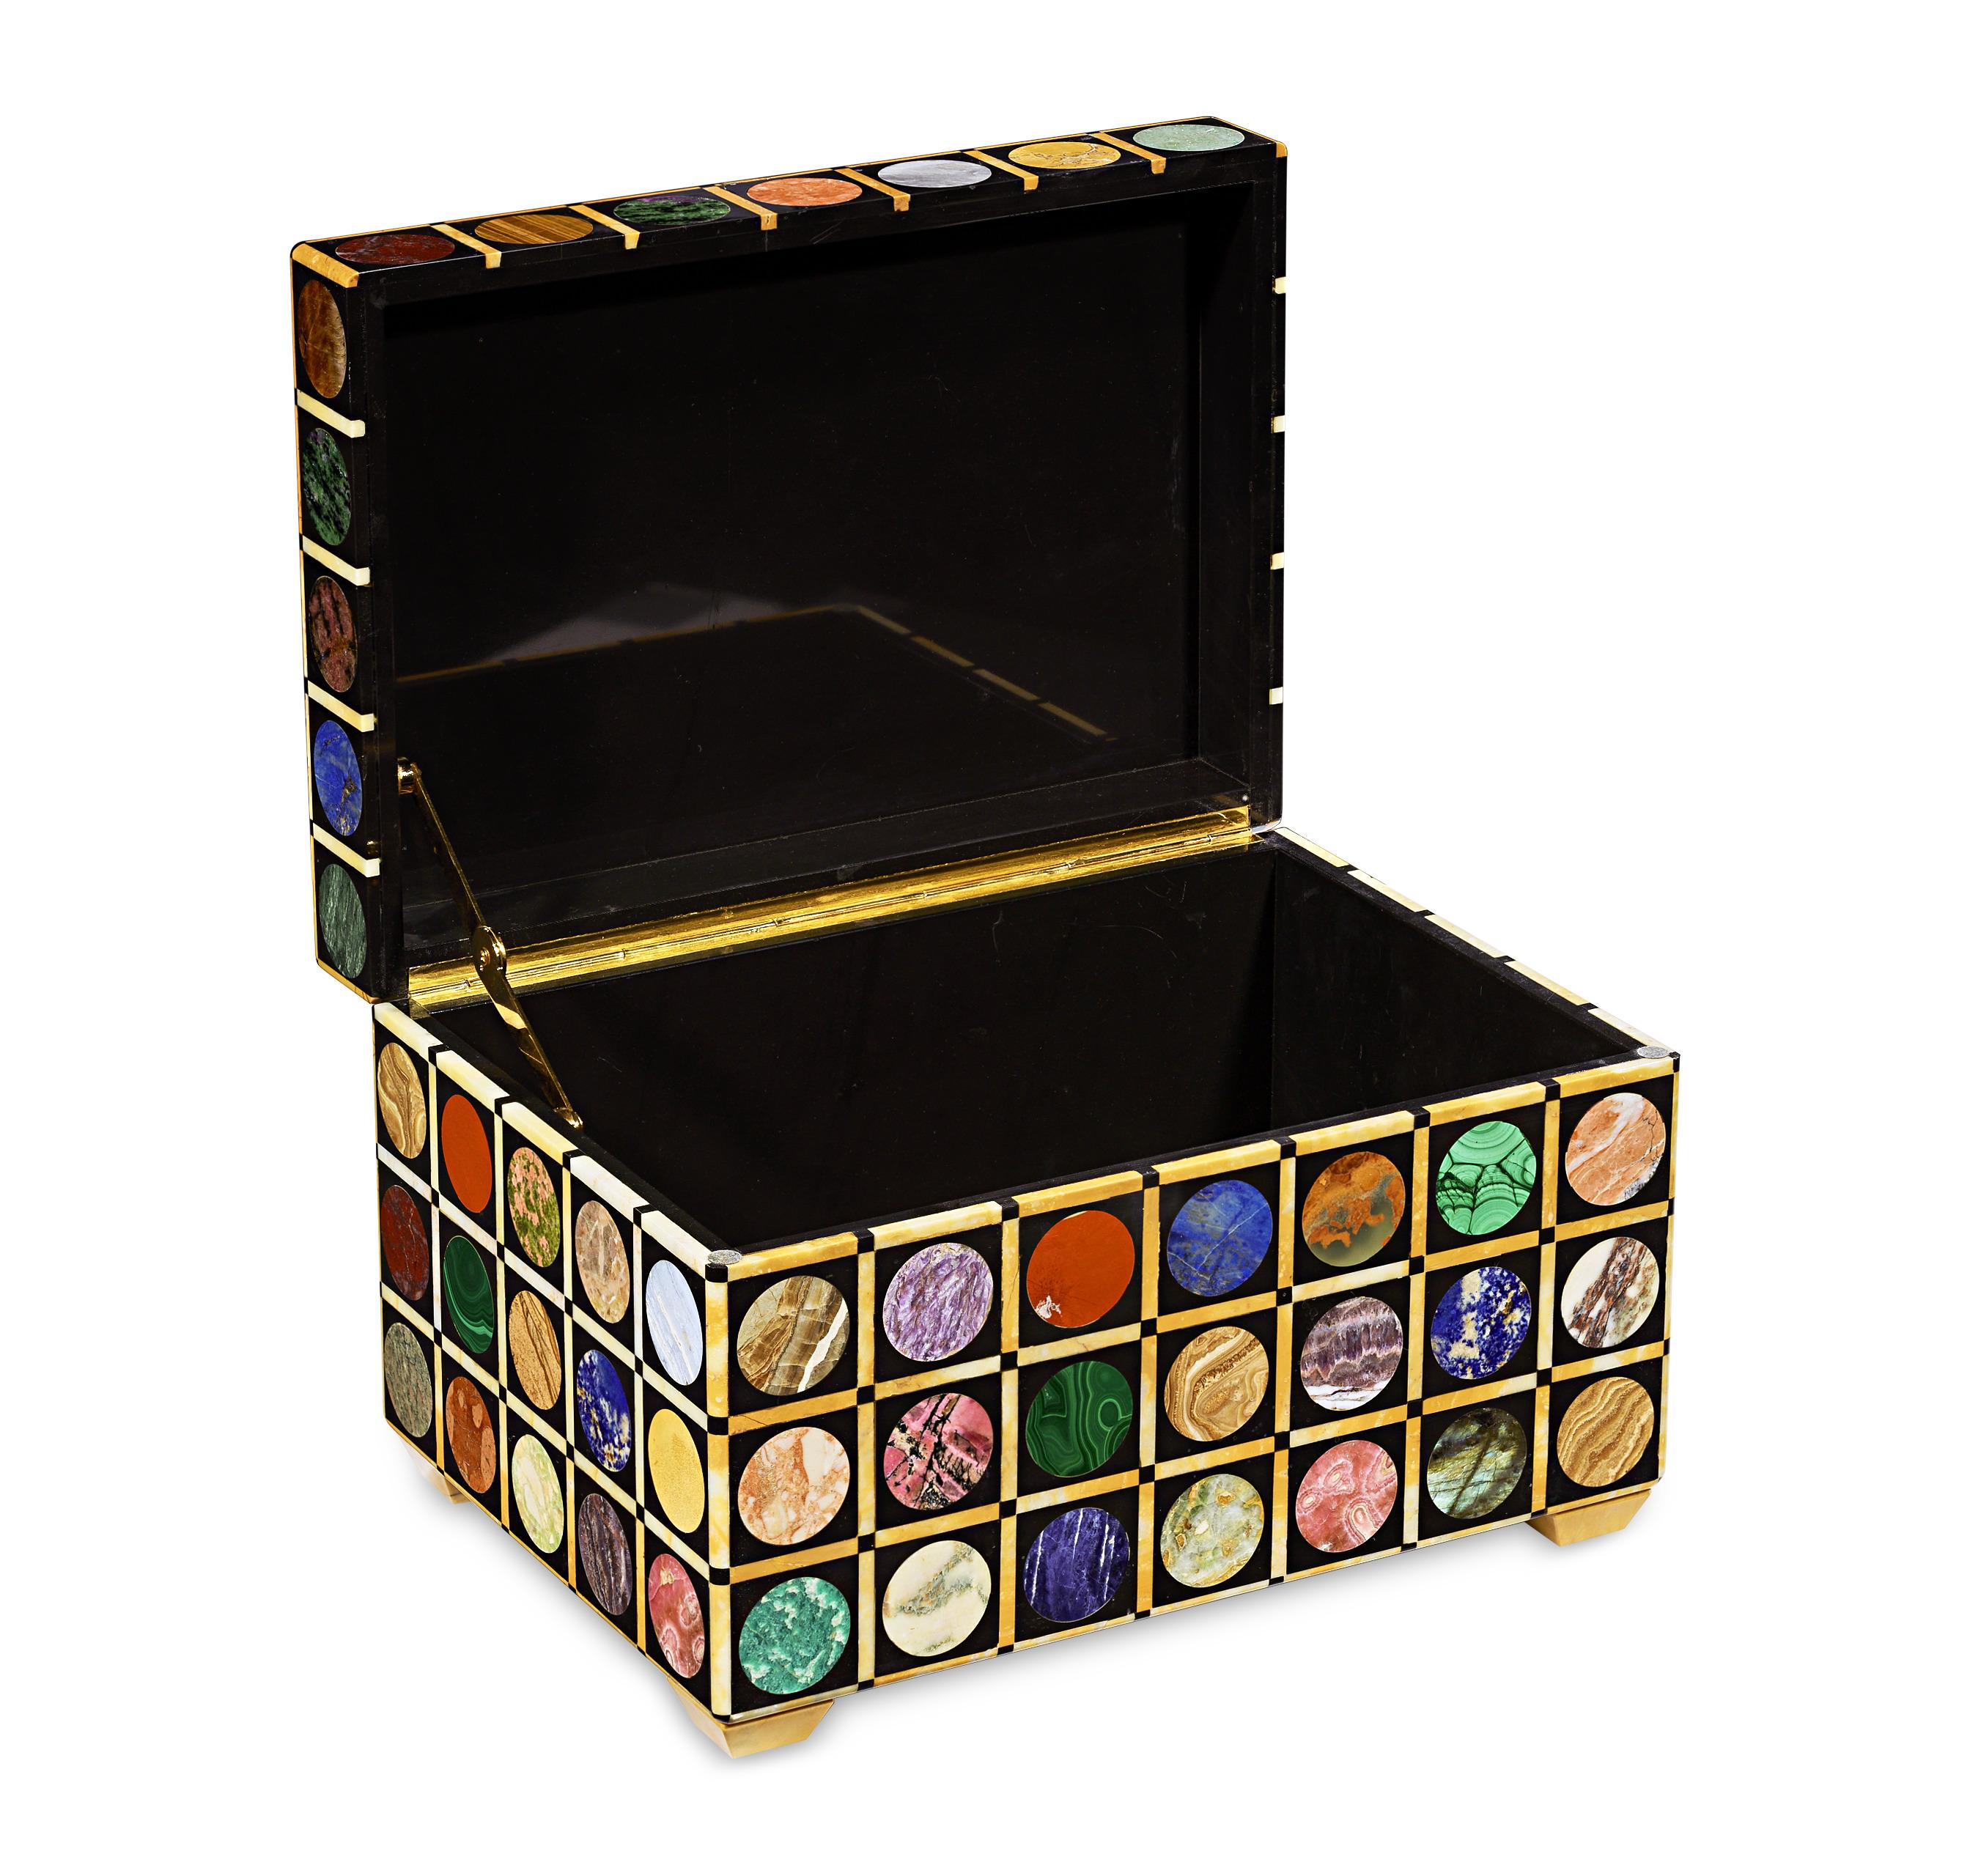 An exceptional relic of natural history, this casket bears 29 different types of rare marbles and hardstones from across the globe, inlaid into each panel in a neat, multi-colored grid pattern. The fascinating semi-precious stones hail from four